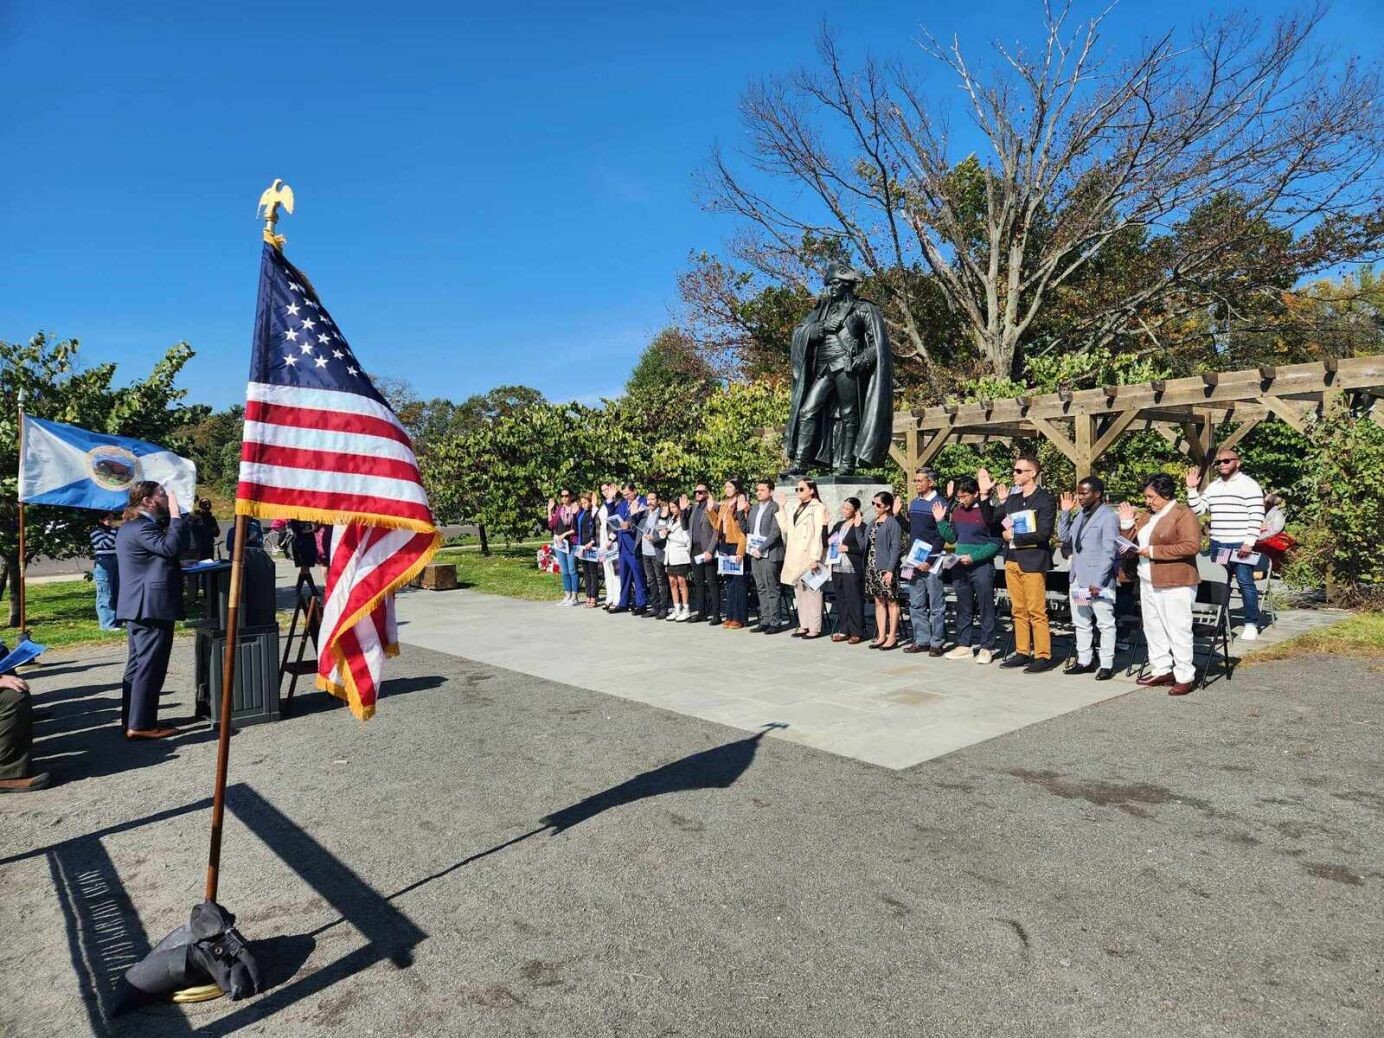 Twenty new American citizens take their oath in front of a statue of General von Steuben